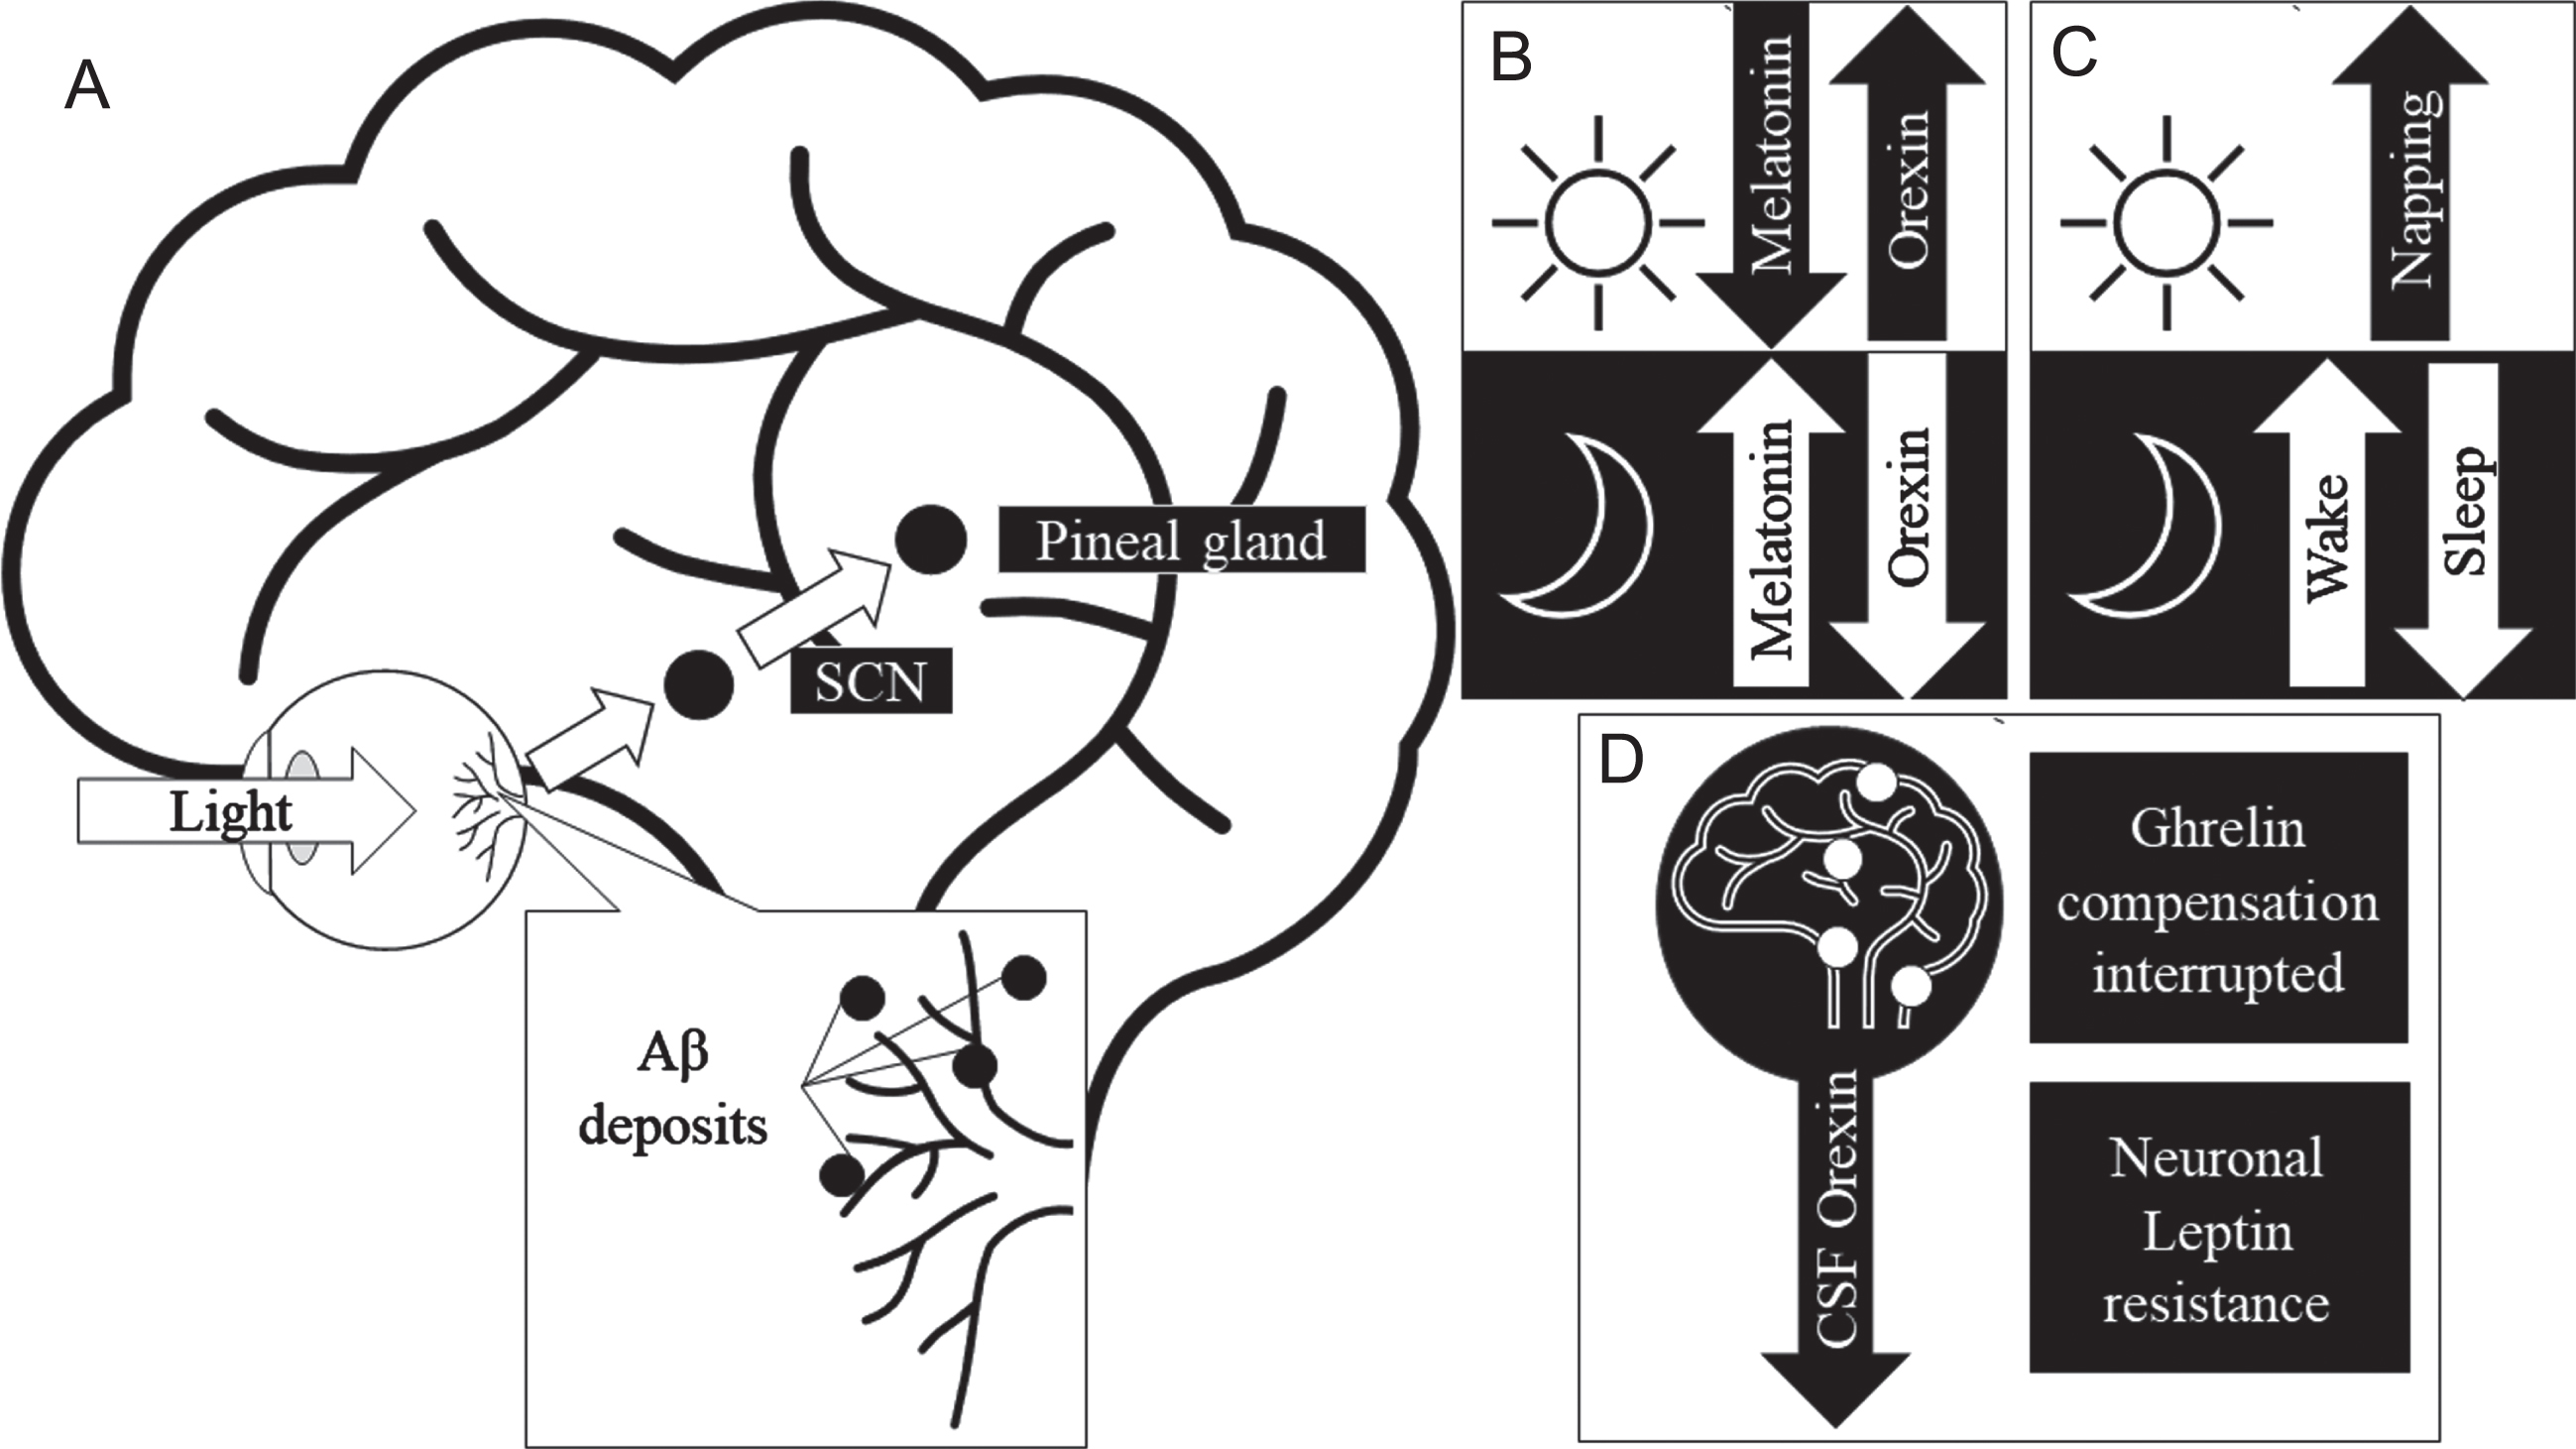 Proposed mechanism for Aβ in the retina to cause sleep-wake cycle and circadian hormone disruptions. A) Physiological pathway of circadian activity. B) Normal activity of sleep hormone expression in response to light saturation in day and night. C) Changes to sleep-wake patterns in response to AD, Retinal Aβ may disrupt the pathway observed in (A) in AD, thereby causing disruption in sleep quality. D) Circadian hormones effected in AD, where CSF orexin expression is decreased and the attenuation of ghrelin and leptin’s neuroprotective role. Aβ, amyloid-β; AD, Alzheimer’s disease; SCN, suprachiasmatic nucleus.